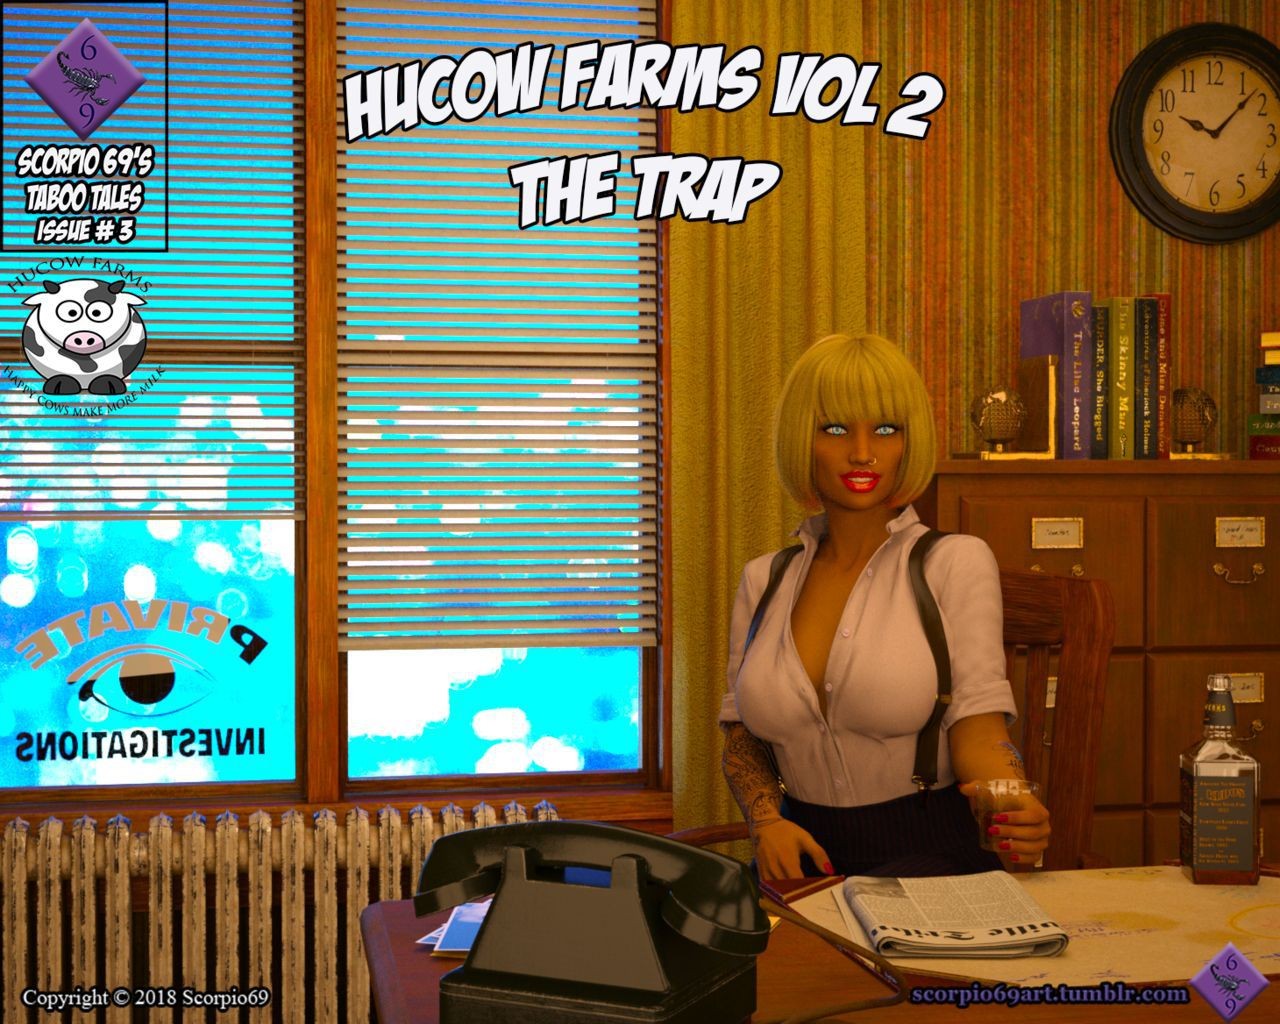 Free Rough Sex Porn Hucow Farms Vol 2 - The Trap (ongoing) Edging